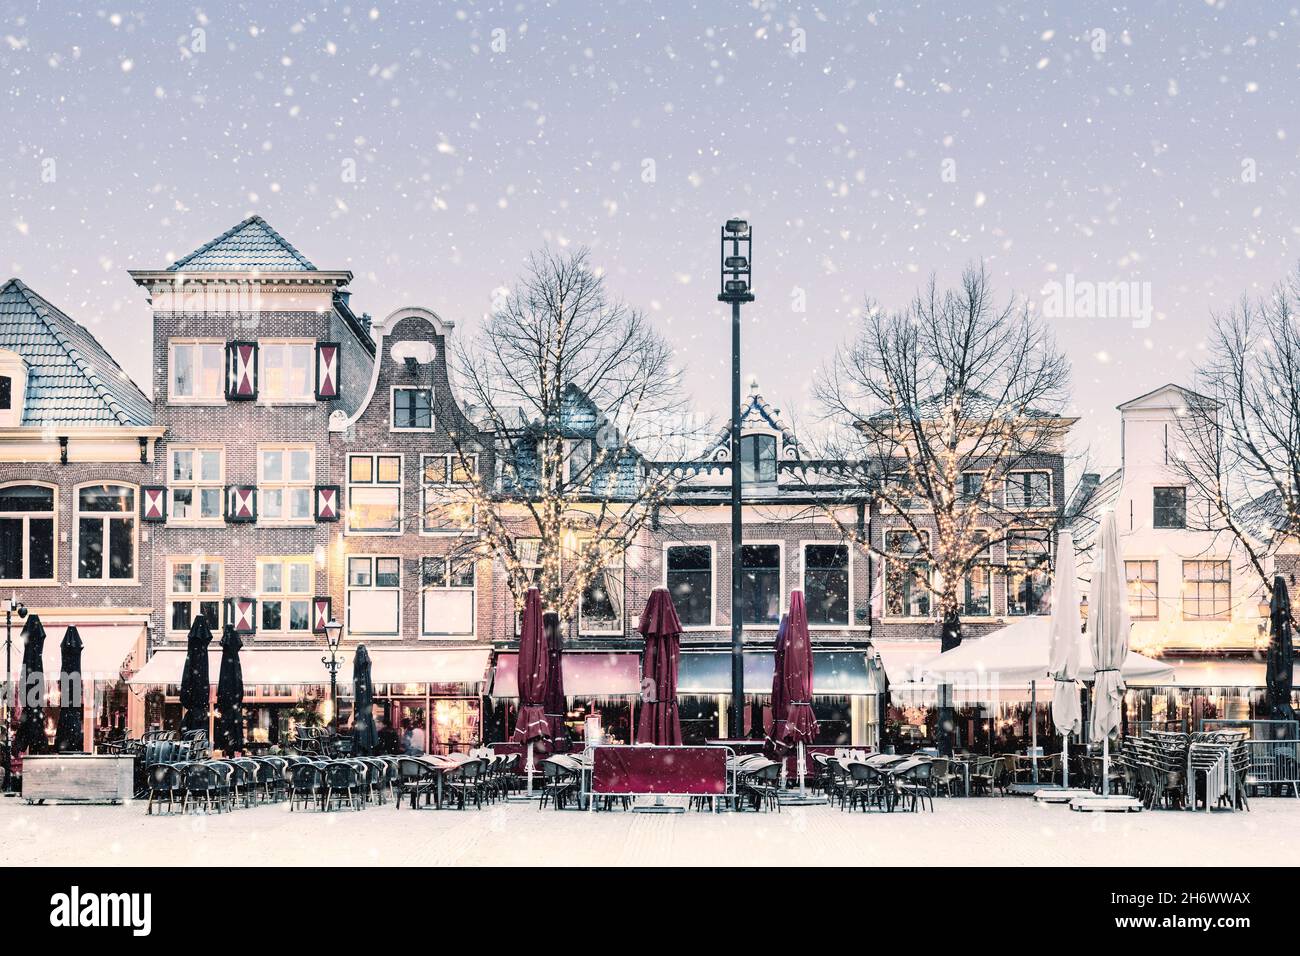 Winter snow view of the famous Dutch Waagplein with pubs and restaurants in the city center of Alkmaar, The Netherlands Stock Photo